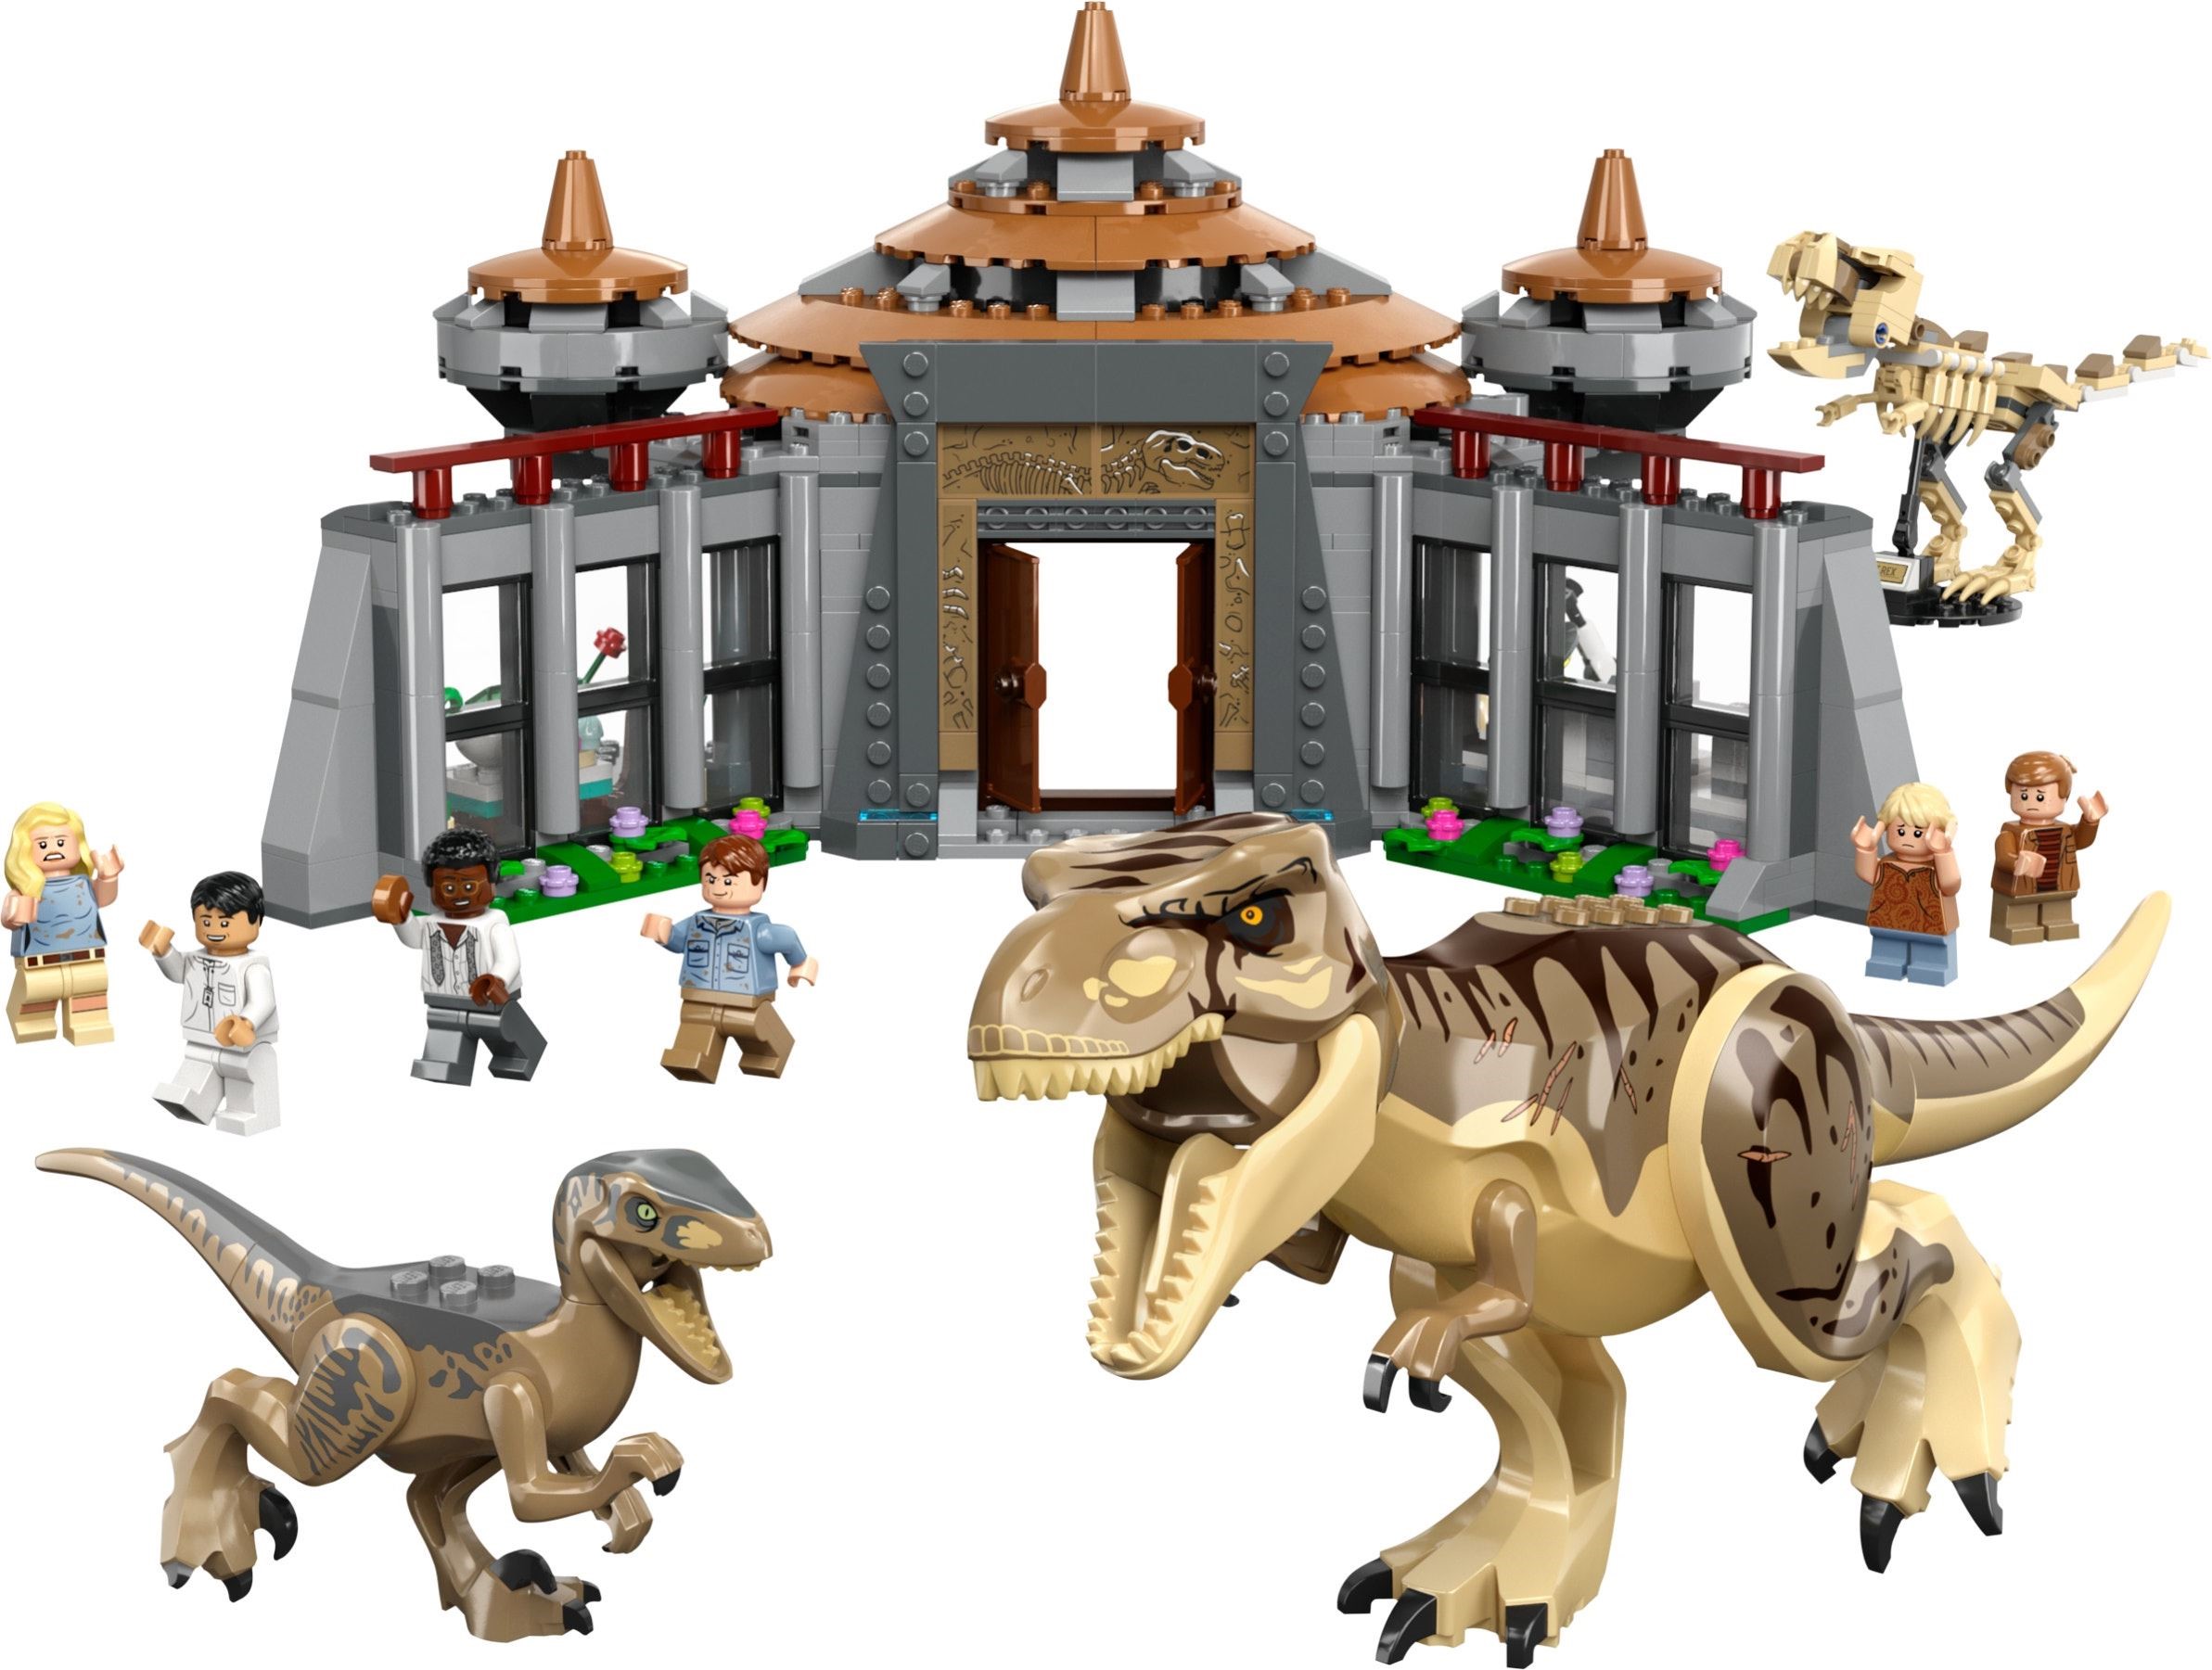 LEGO Jurassic World Dino Combo Pack 2 in 1 Triceratops and Velociraptor  Gift Set (66774, 391pcs)